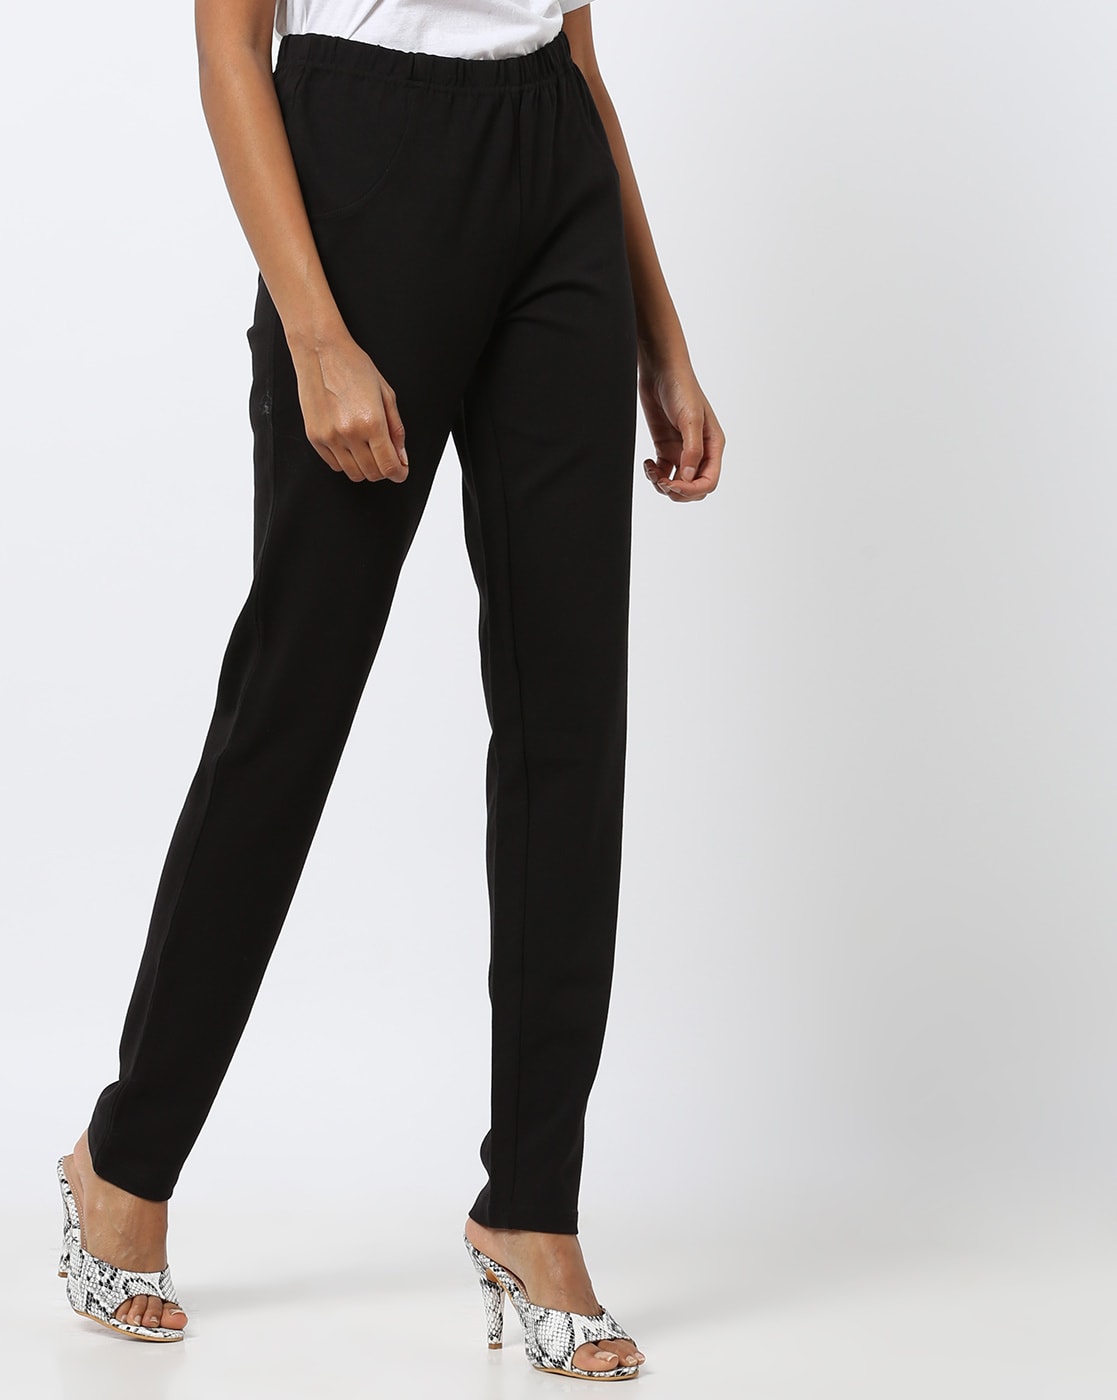 Buy Black Trousers  Pants for Women by AND Online  Ajiocom